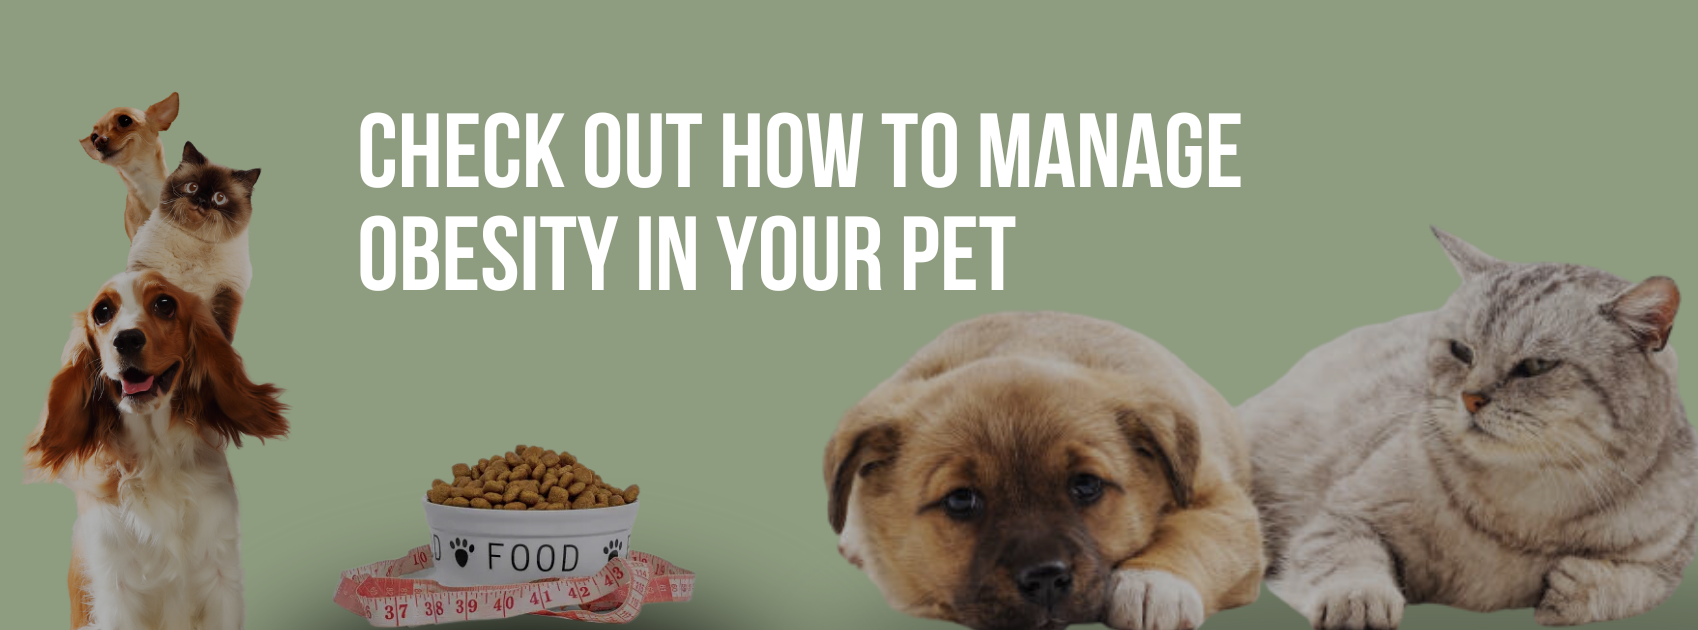 CHECK OUT HOW TO MANAGE OBESITY IN YOUR PET